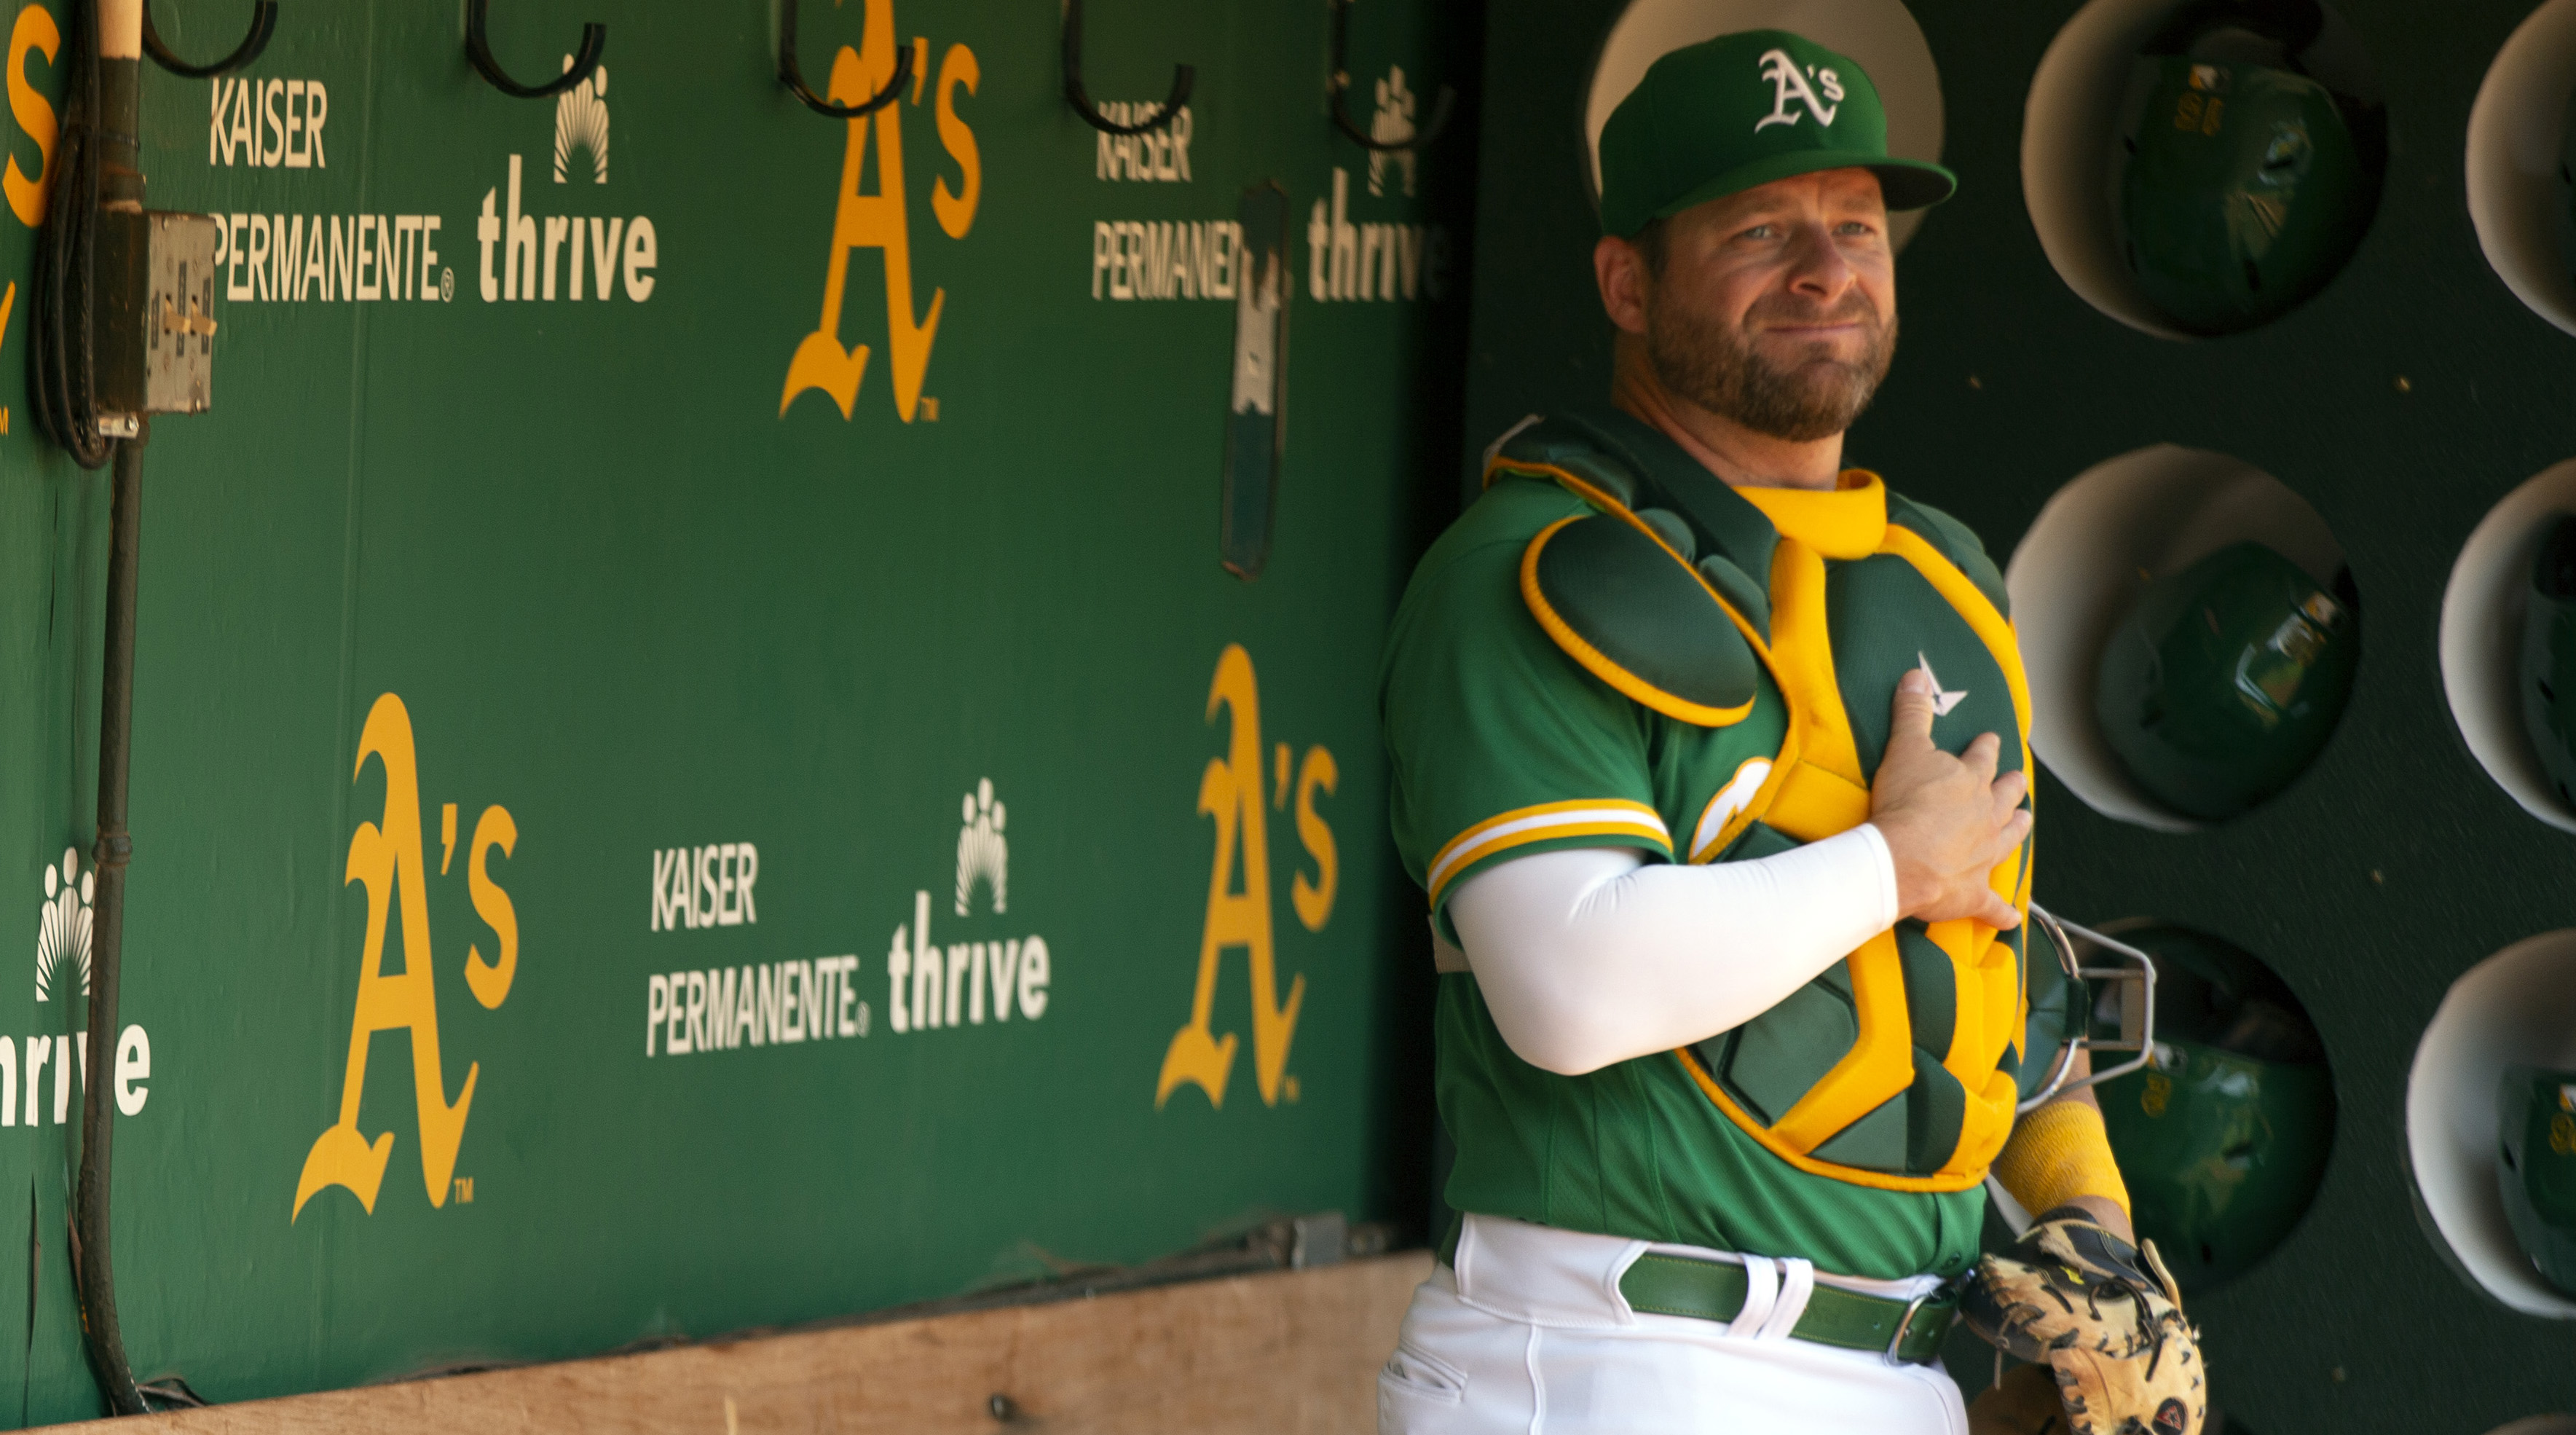 Stephen Vogt stands in the dugout wearing catchers’ gear with one hand over his heart